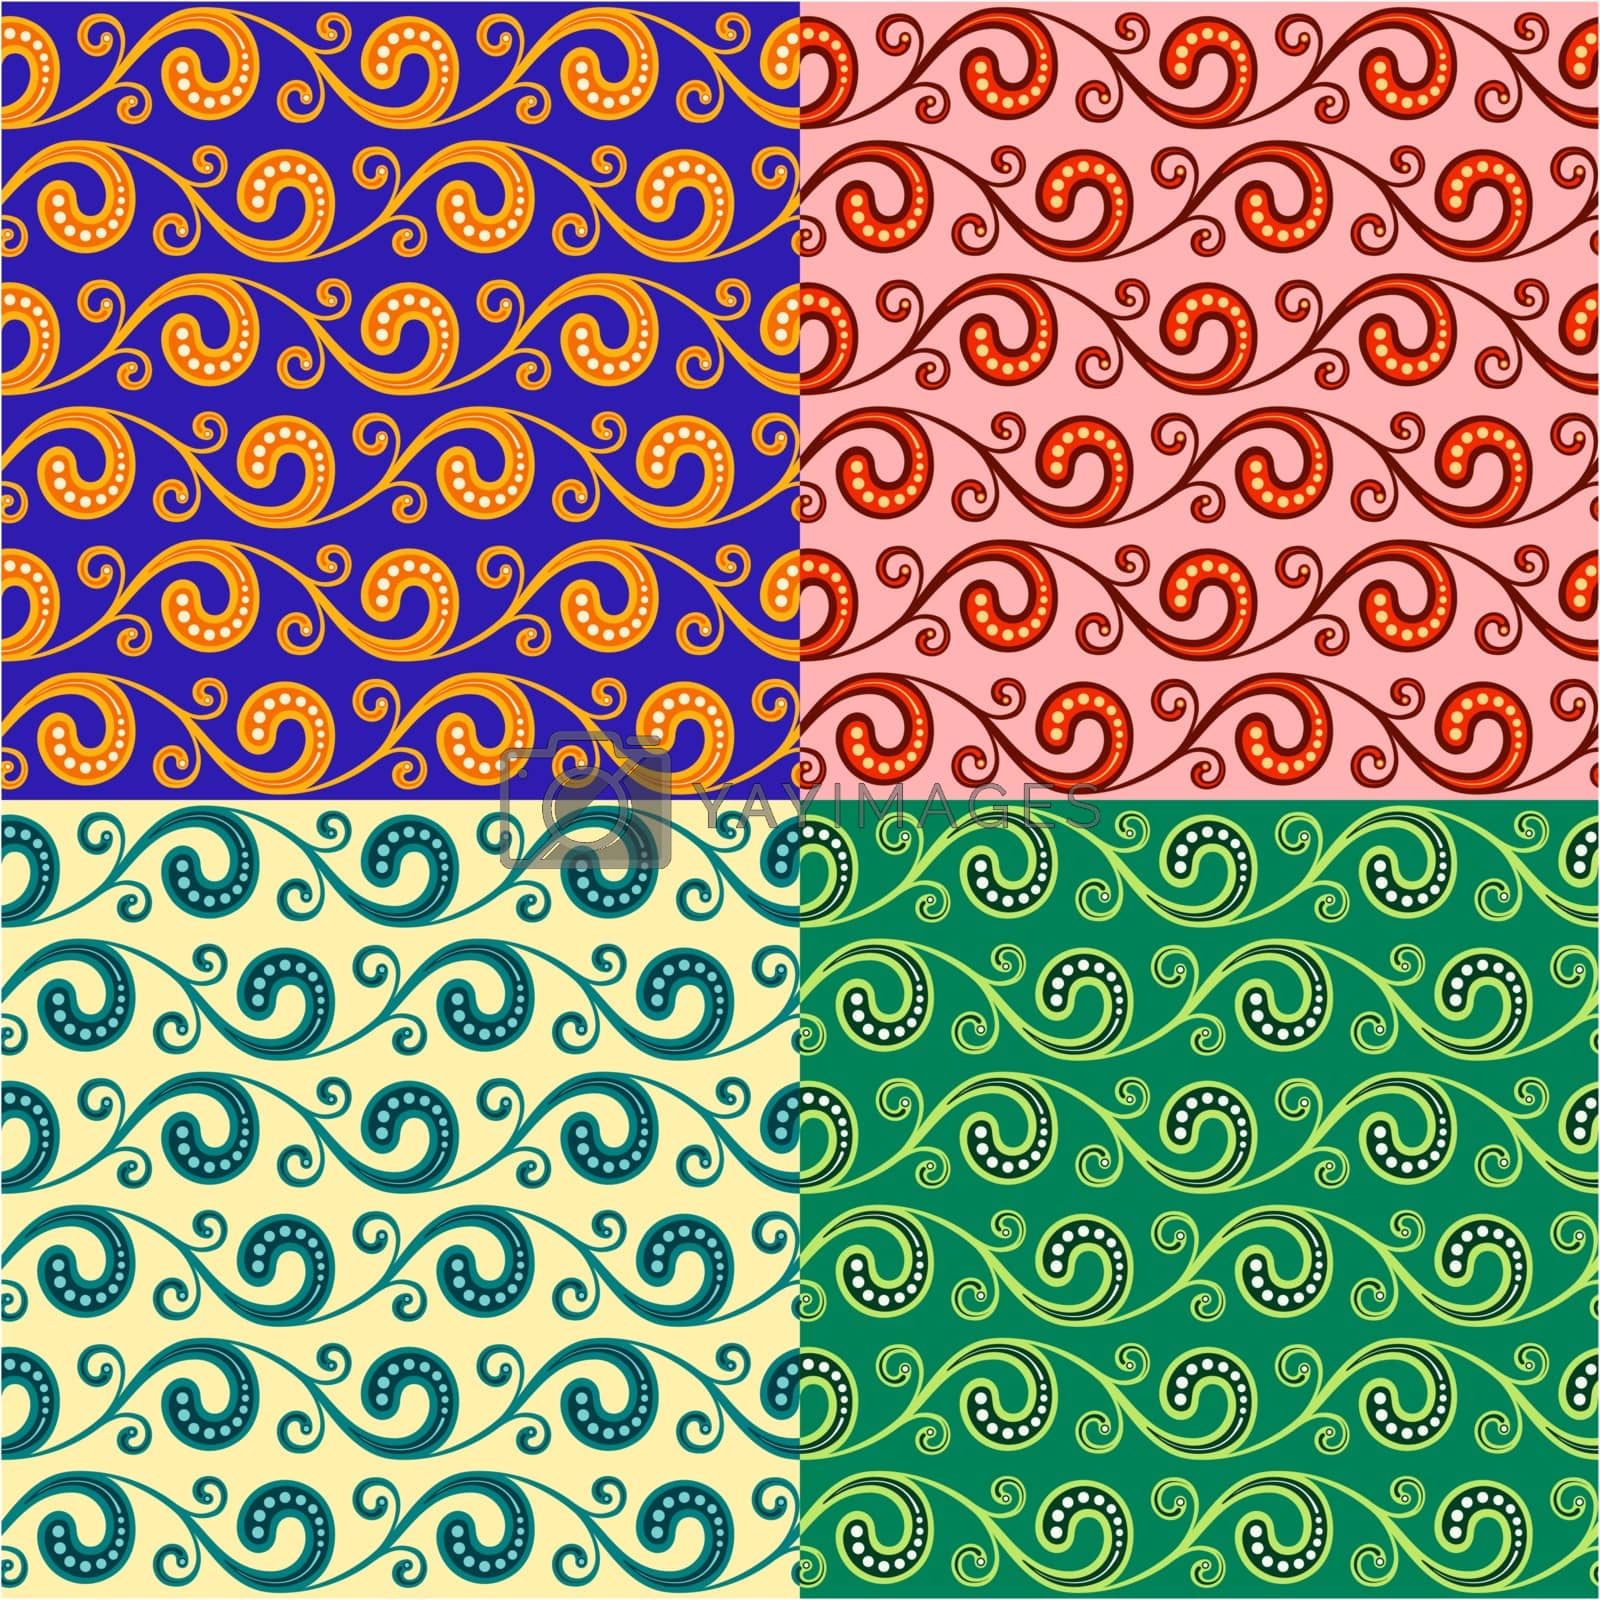 Royalty free image of swirly wave pattern by riedjal